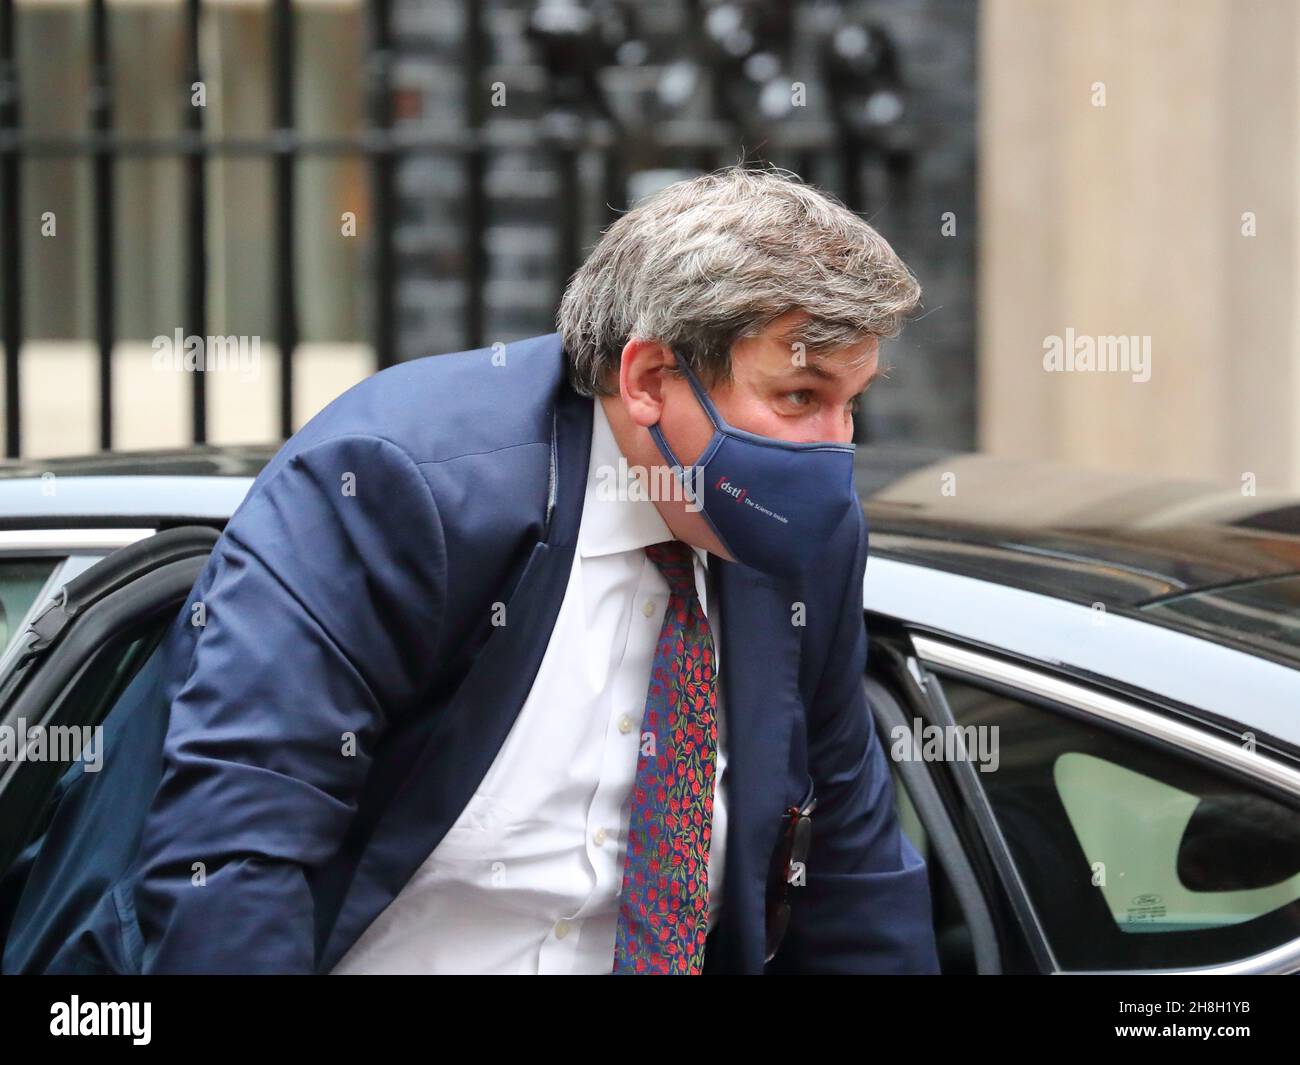 London, UK. 30th Nov, 2021. Minister of State for Crime and Policing Kit Malthouse arrives for the weekly Cabinet Meeting at Downing Street wearing a face mask. Credit: Uwe Deffner/Alamy Live News Stock Photo